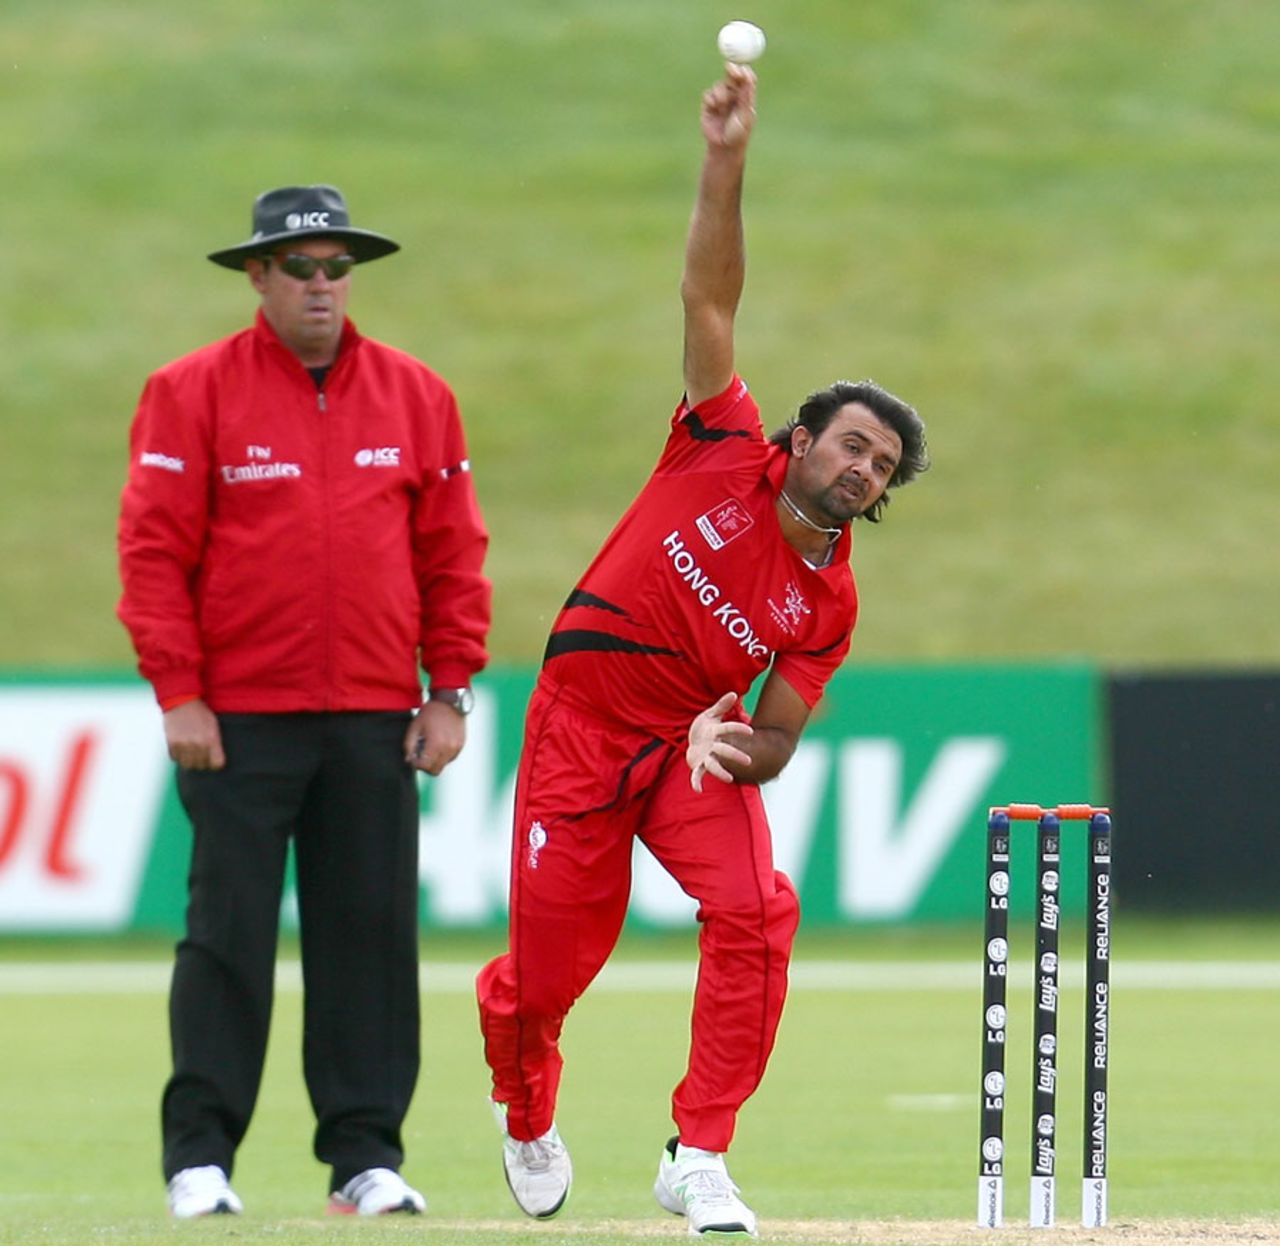 Haseeb Amjad demonstrates his bowling action, Scotland v Hong Kong, World Cup 2015 qualifiers, Queenstown Events Centre, January 13, 2014